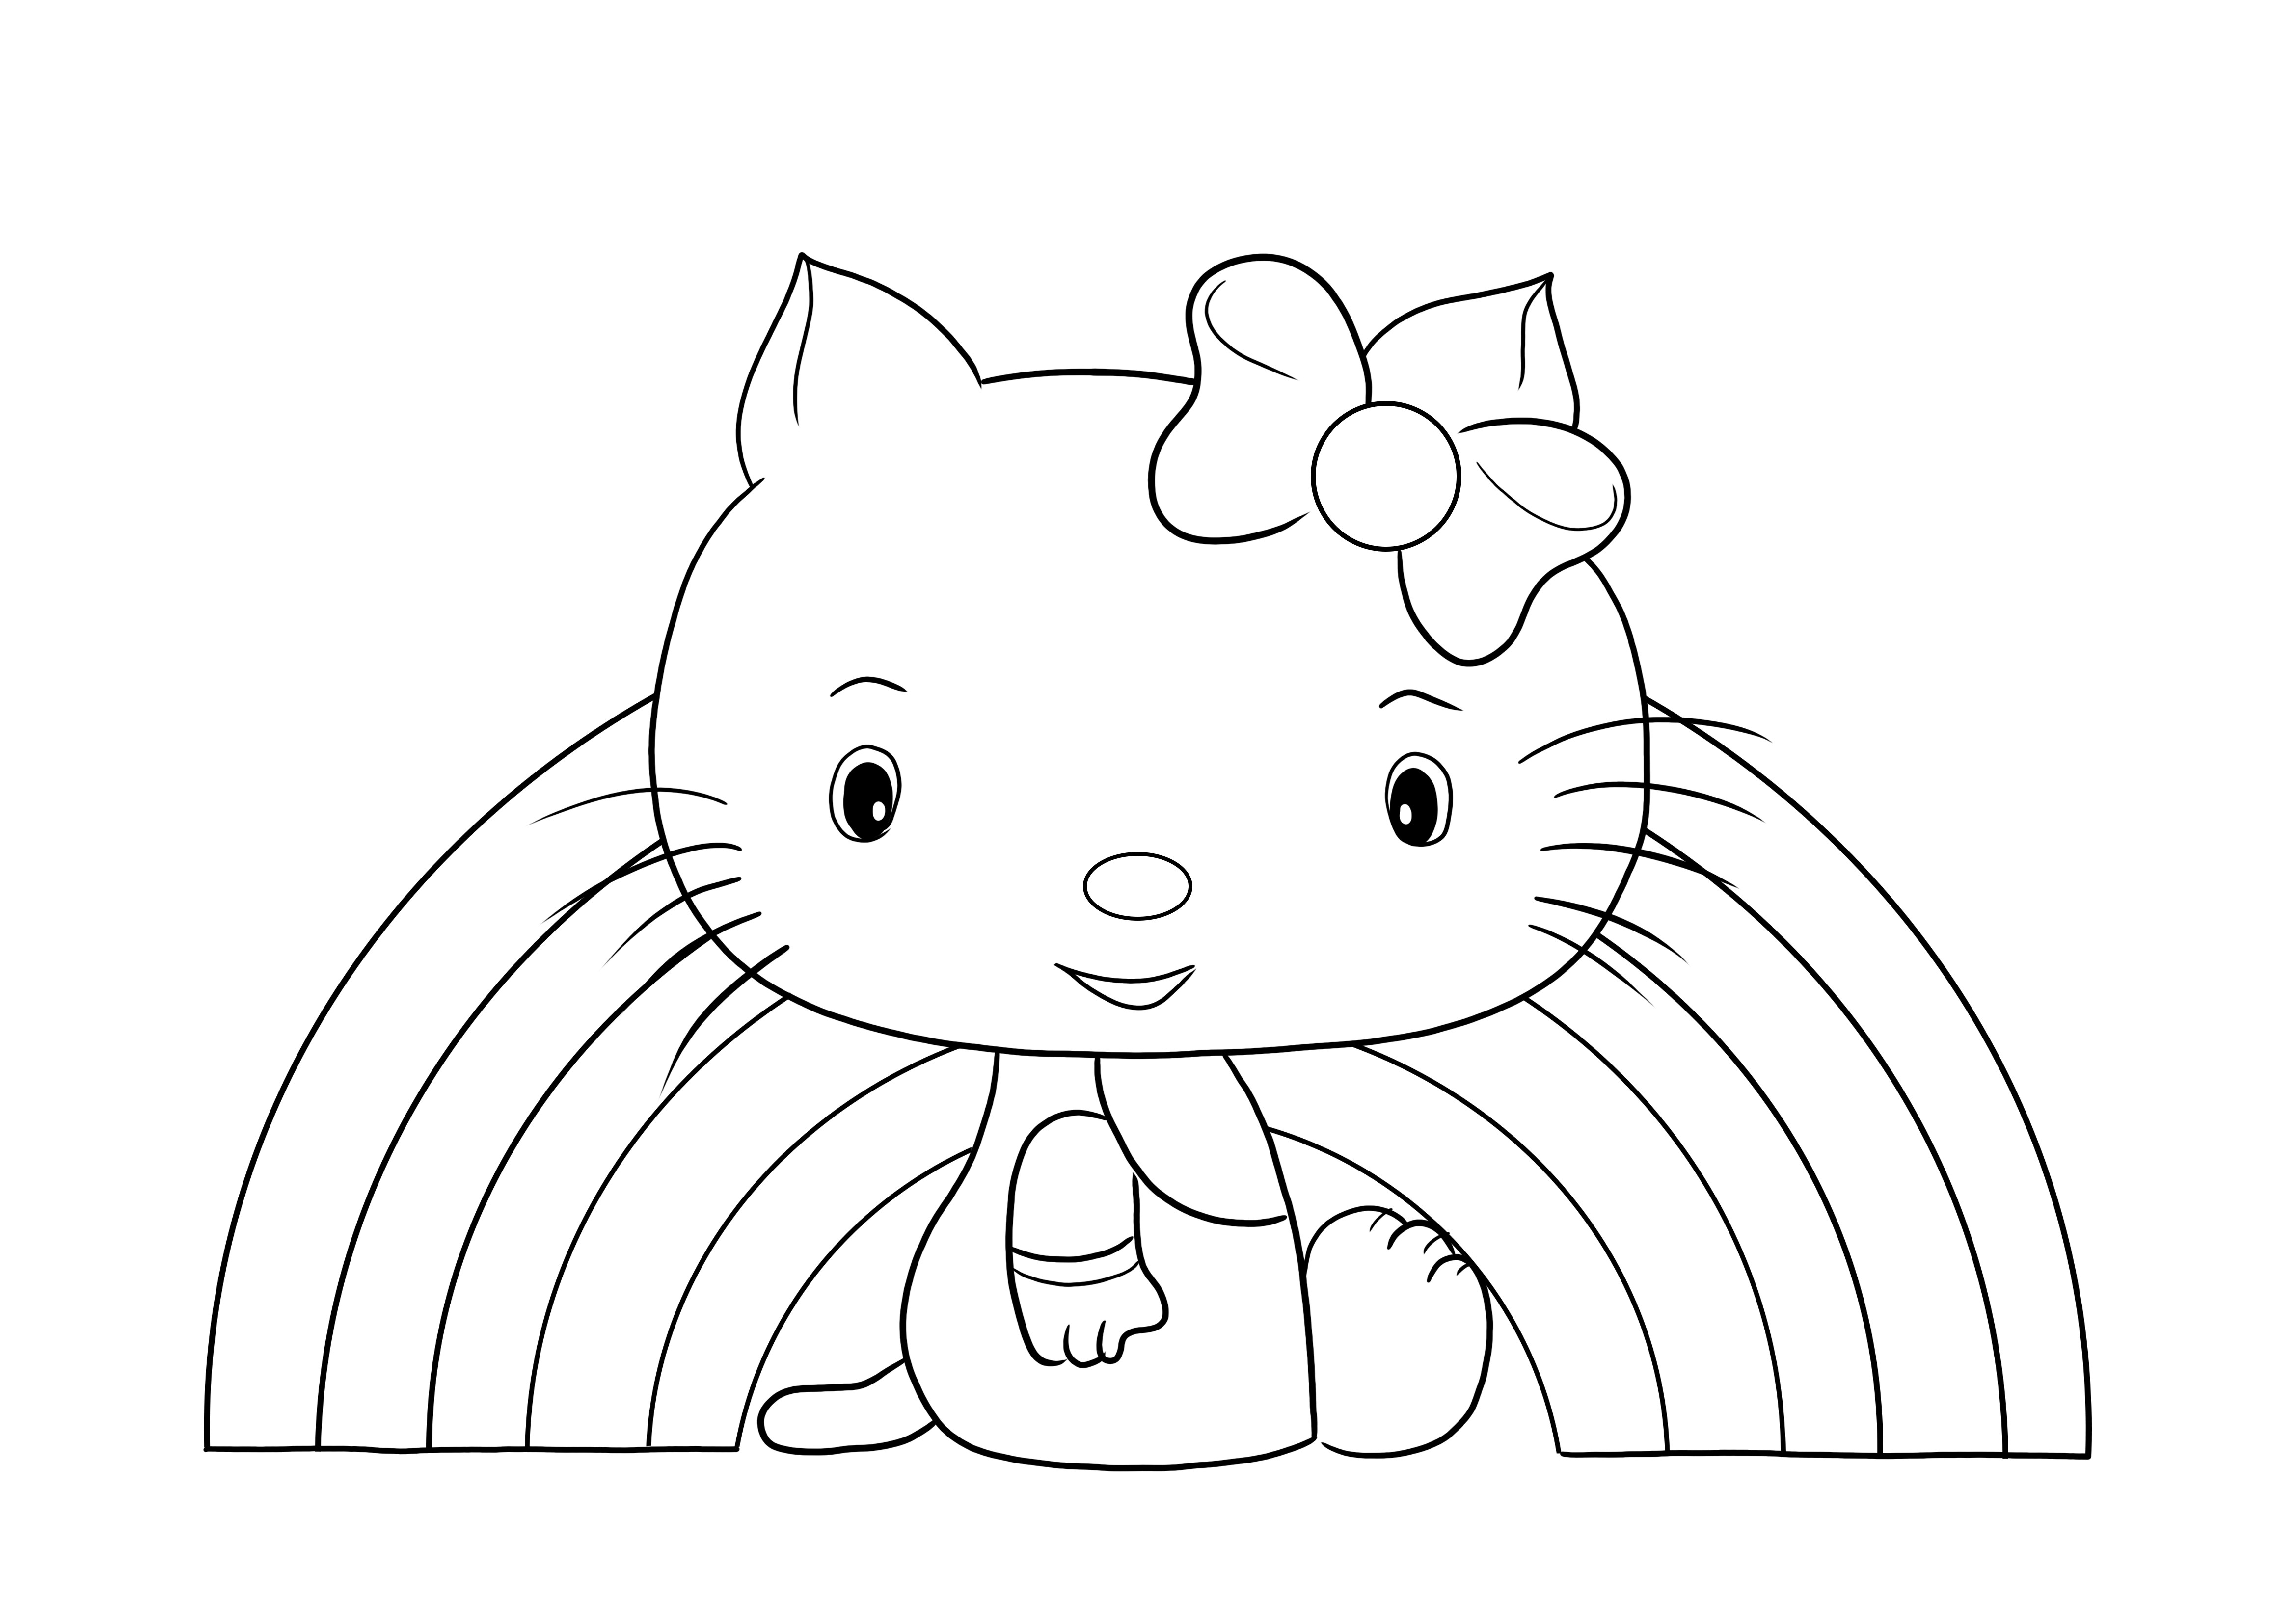 Hello Kitty Rainbow coloring page free to download and print